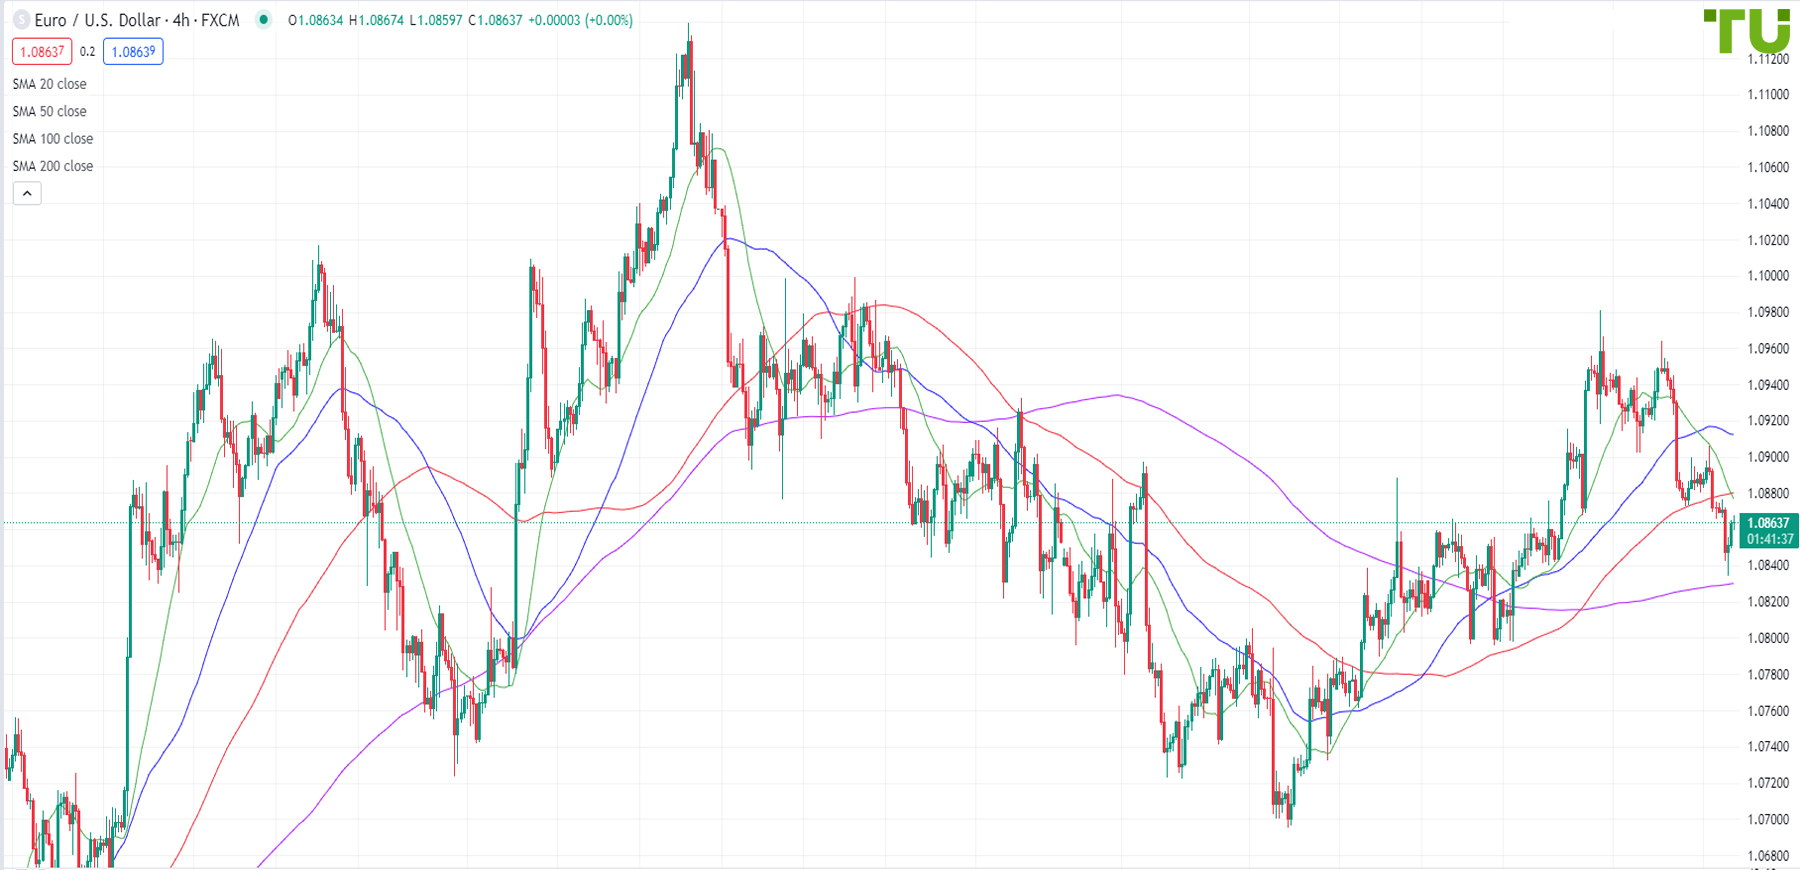 Euro/dollar is trying to get back above 1.0865